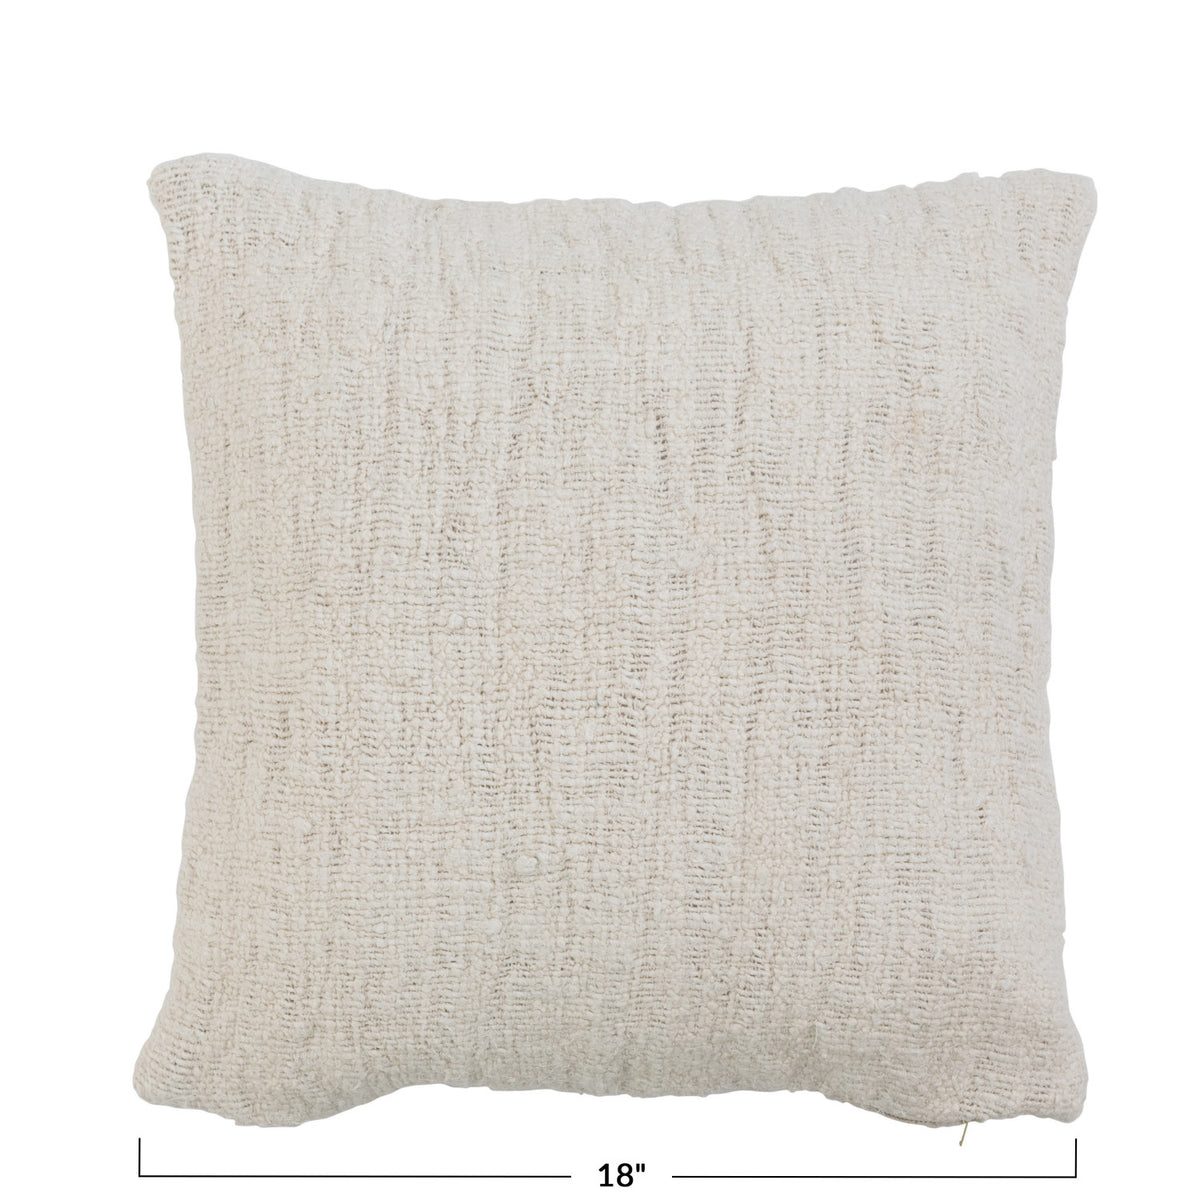 Stonewashed Silk Woven Cotton Pillow Polyester Fill